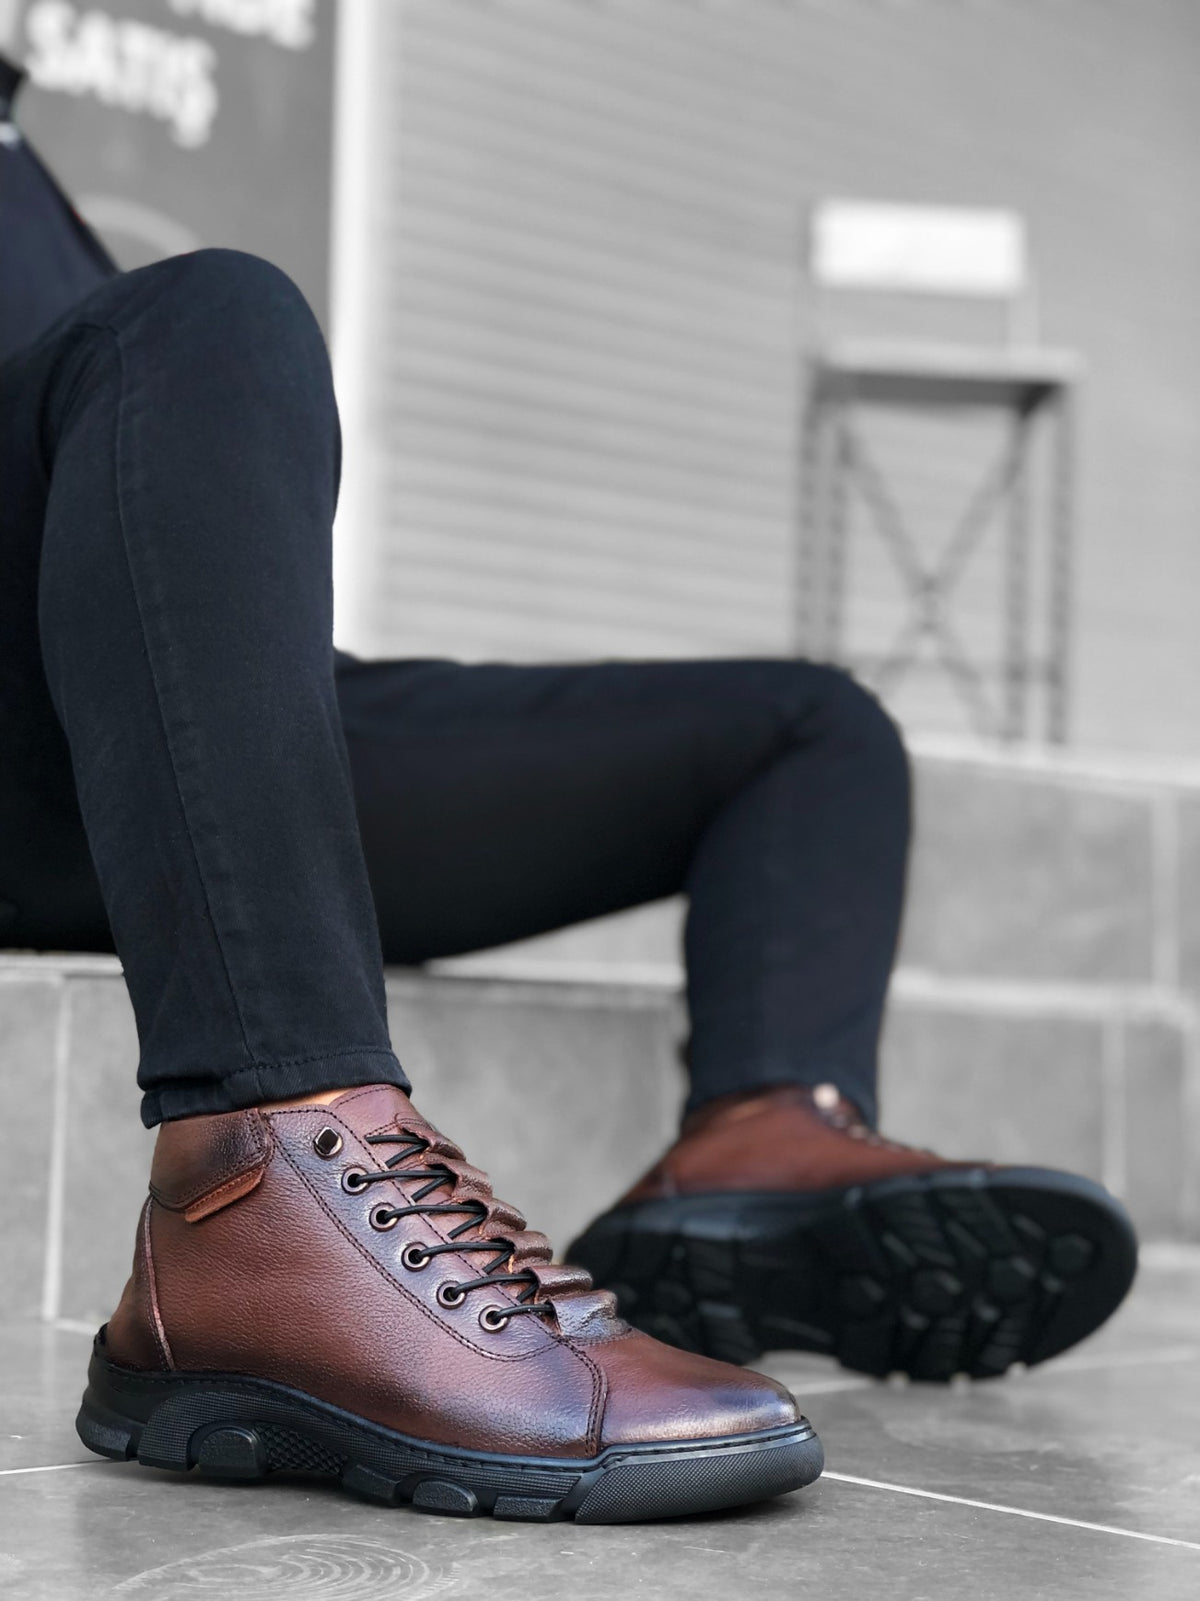 BA0213 Hidden Laced Genuine Leather Brown Men's Half Ankle Boots - STREET MODE ™